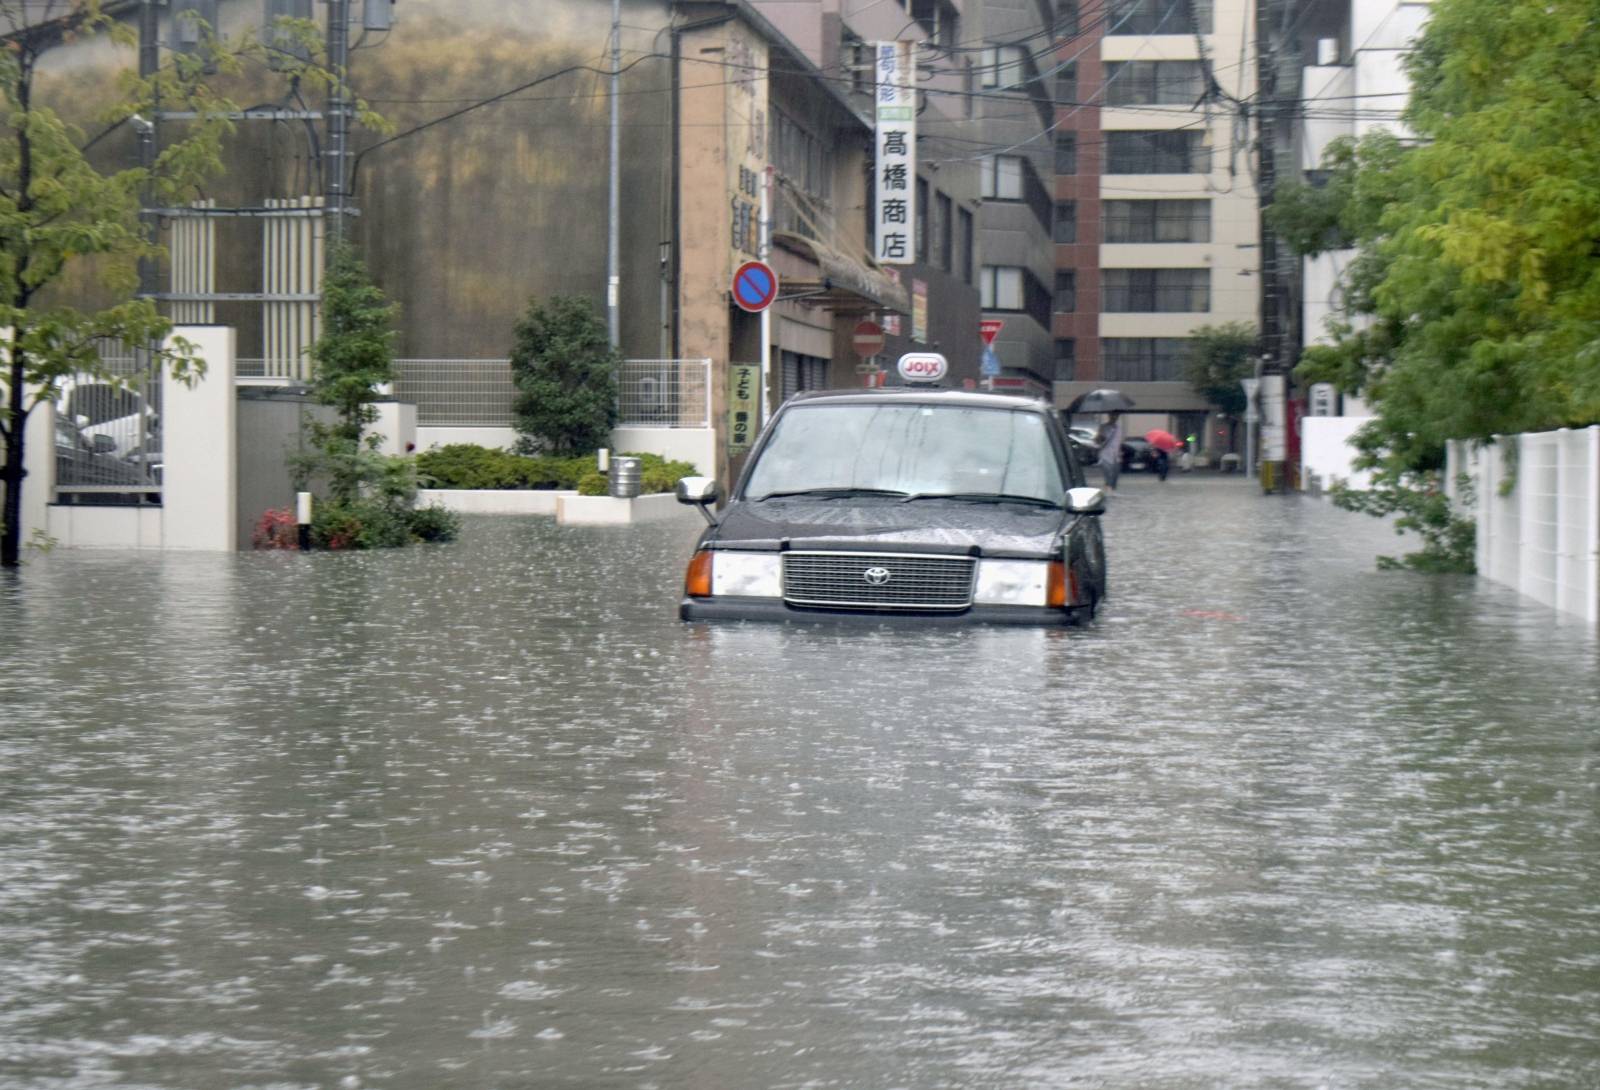 A taxi is stuck in floodwaters caused by heavy rain, in Saga, Saga prefecture, southern Japan